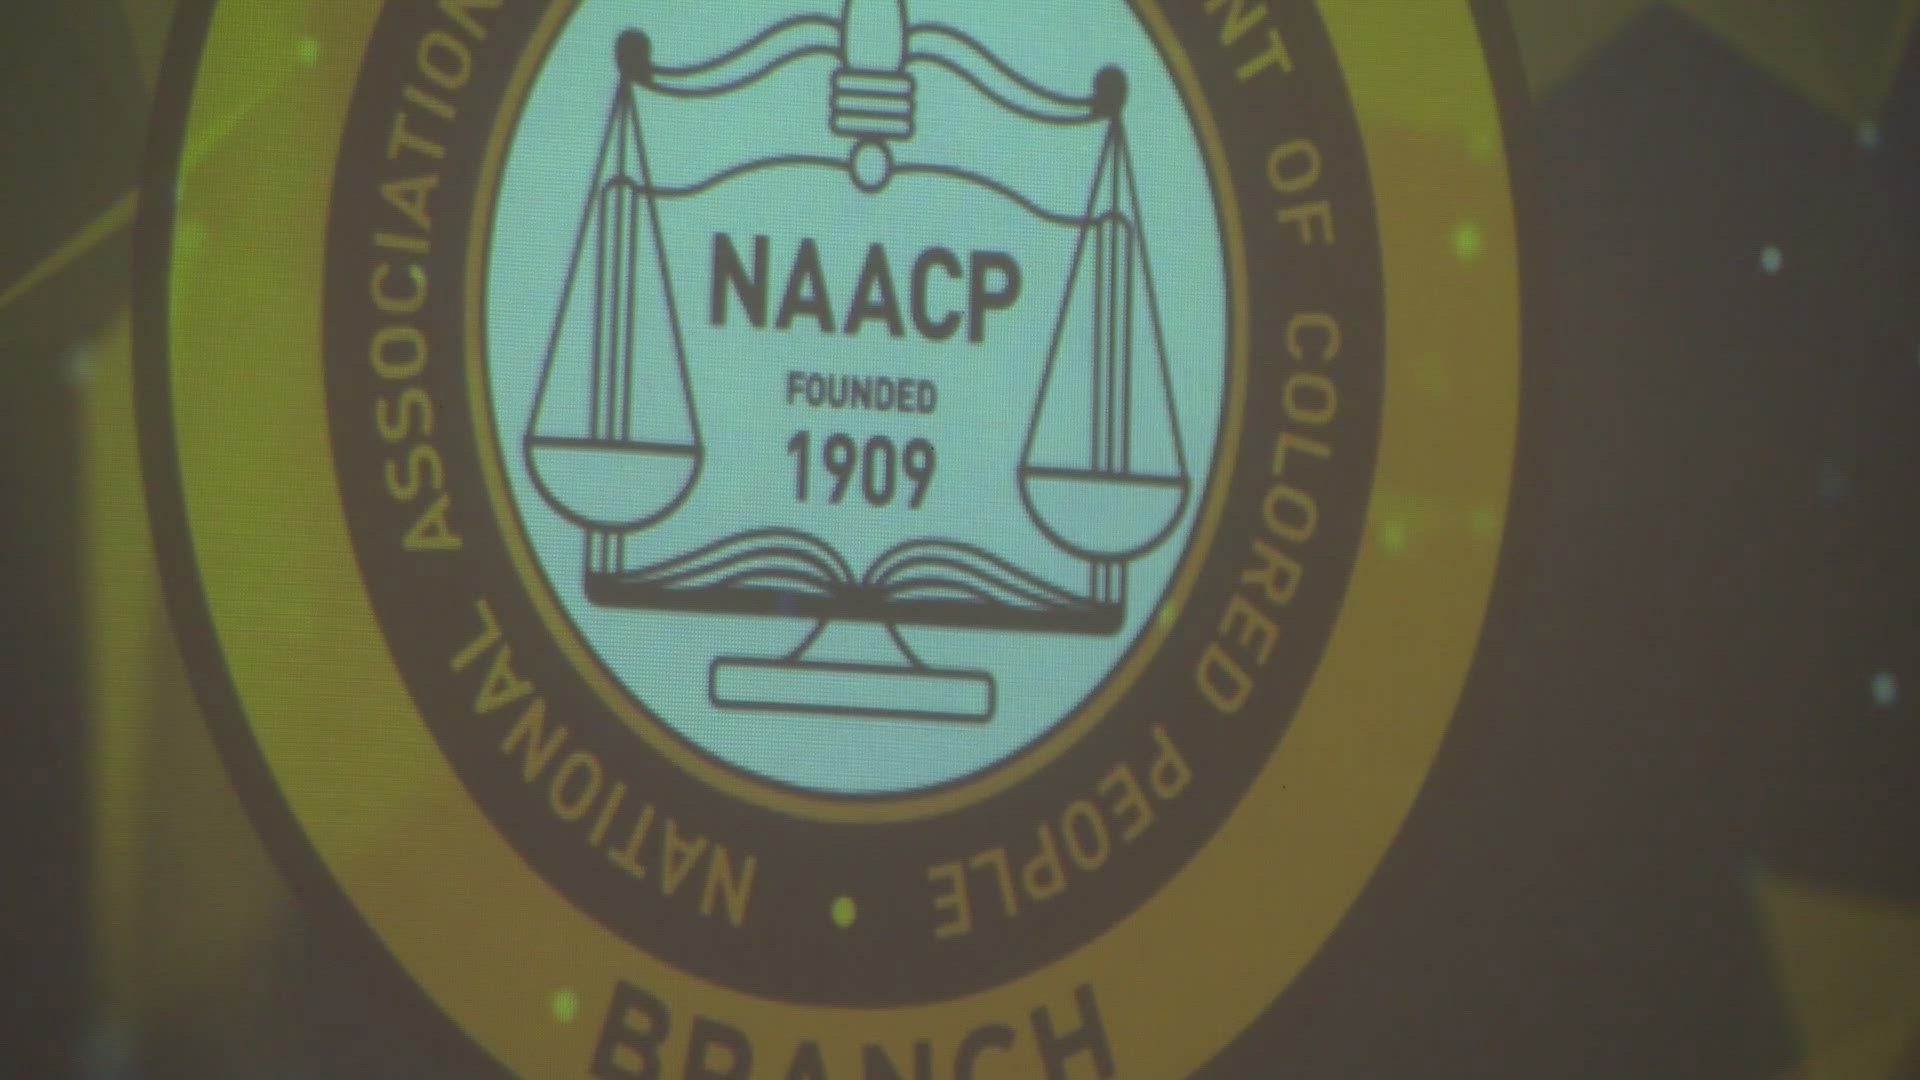 Hundreds gathered as the NAACP presented an award to Brittney Griner and to raise money to fund programs and services in health, education and more.